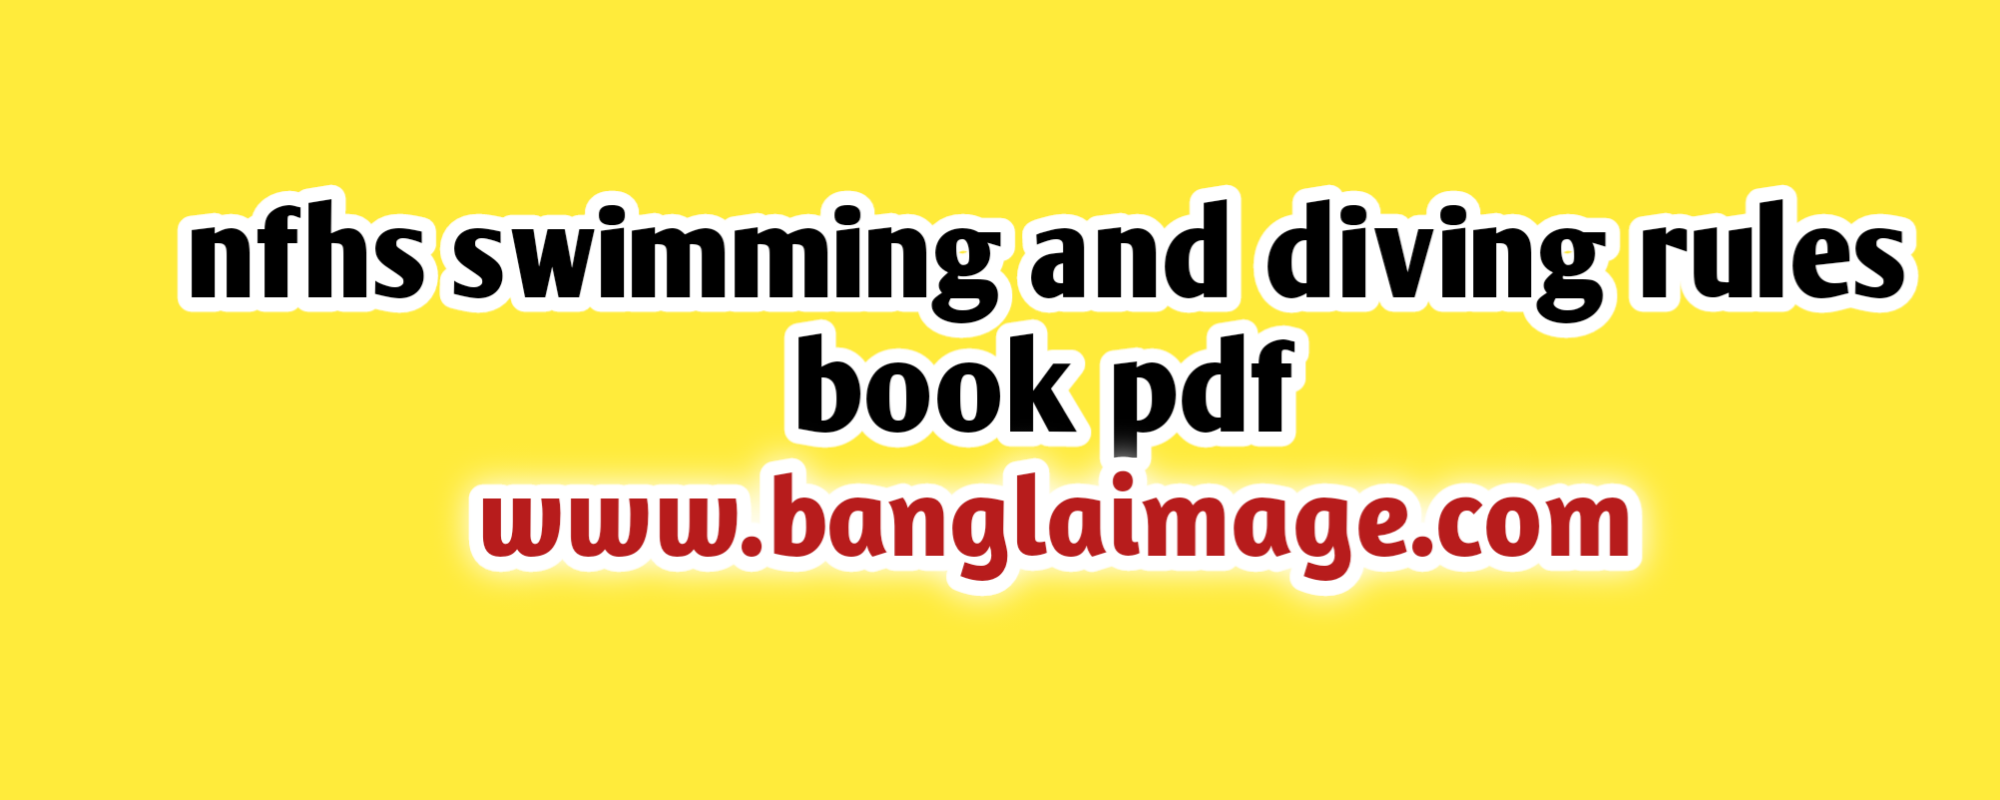 nfhs swimming and diving rules book pdf, nfhs swimming and diving rules book pdf download, nfhs swimming and diving rules, the nfhs swimming and diving rules book pdf download